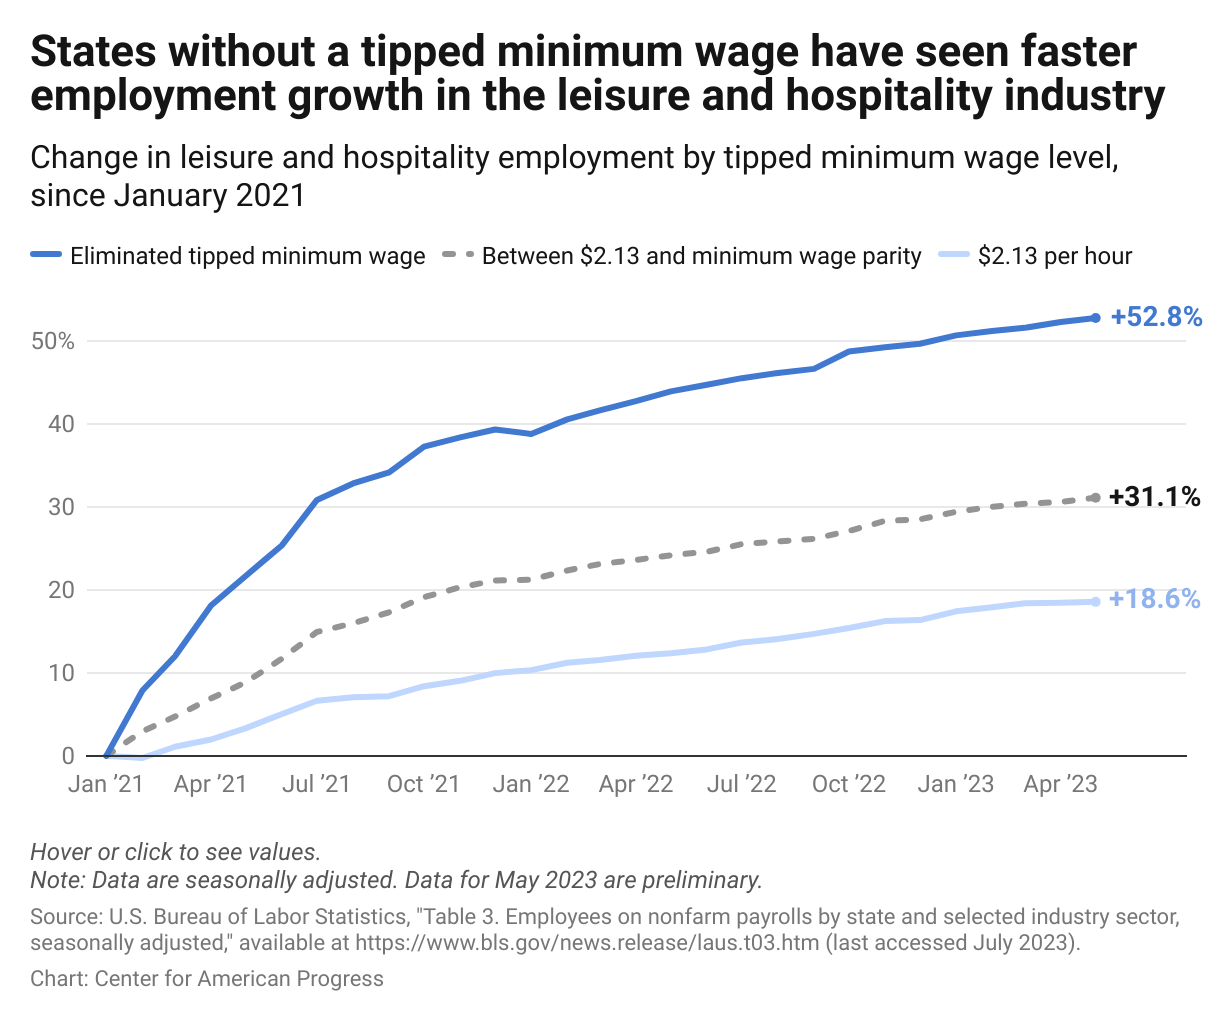 A line graph showing the recovery of the leisure and hospitality industry from January 2021 to May 2023 in states with the federal tipped minimum wage of $2.13, compared with states with that have higher tipped minimum wages and states that eliminated tipped minimum wages.